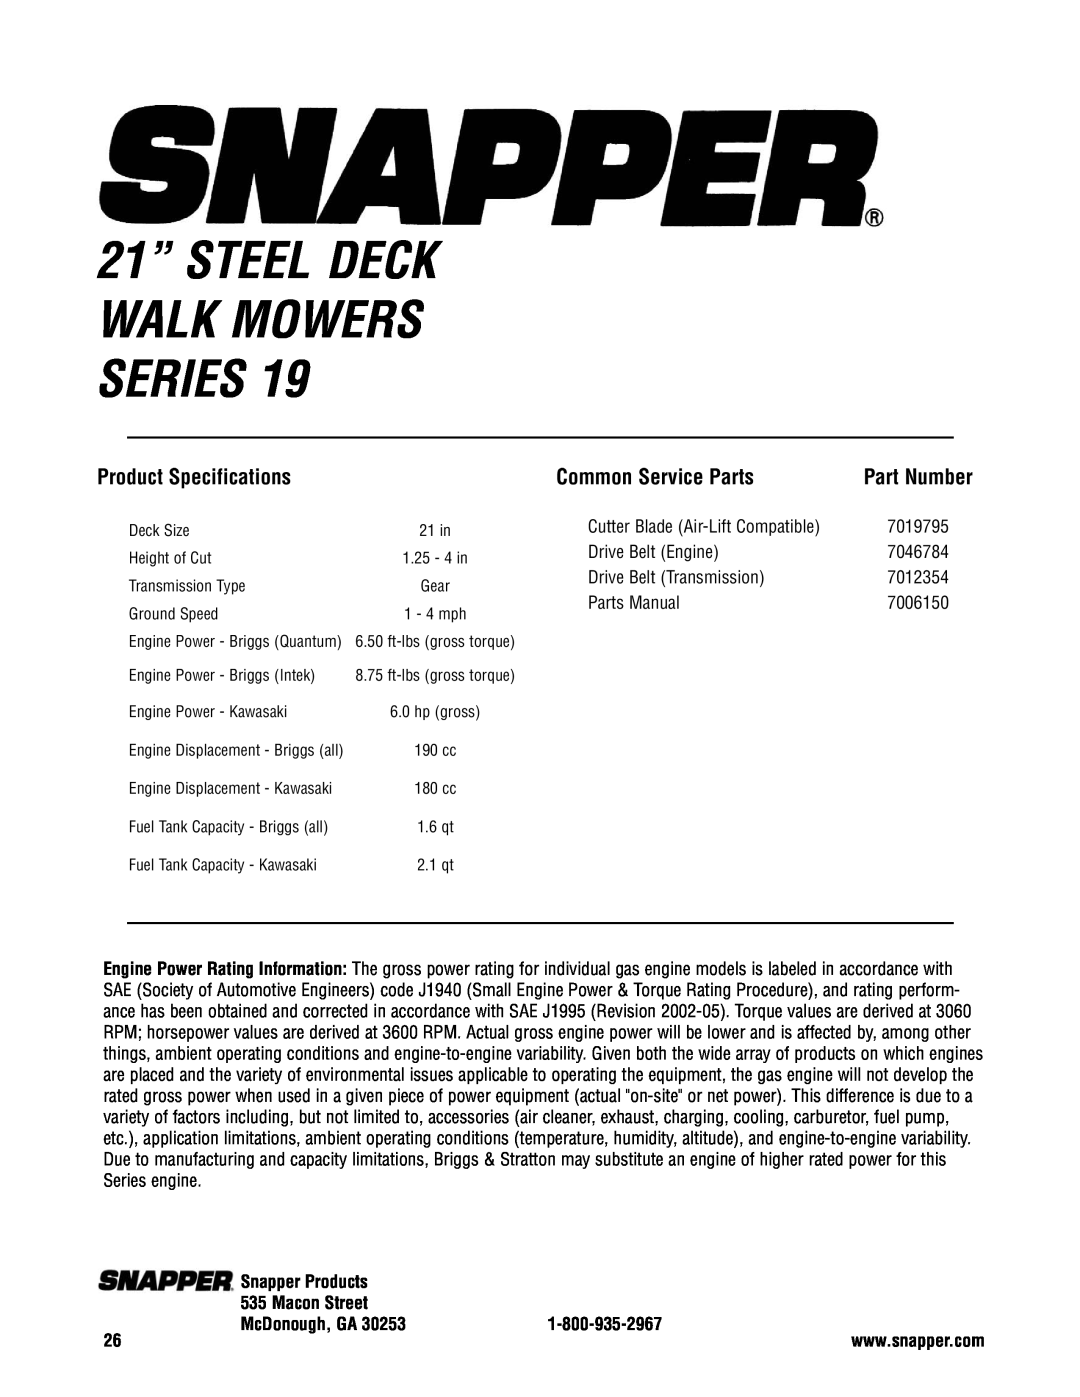 Snapper 2167519B Product Specifications, Common Service Parts, Part Number, Snapper Products, Macon Street, McDonough, GA 